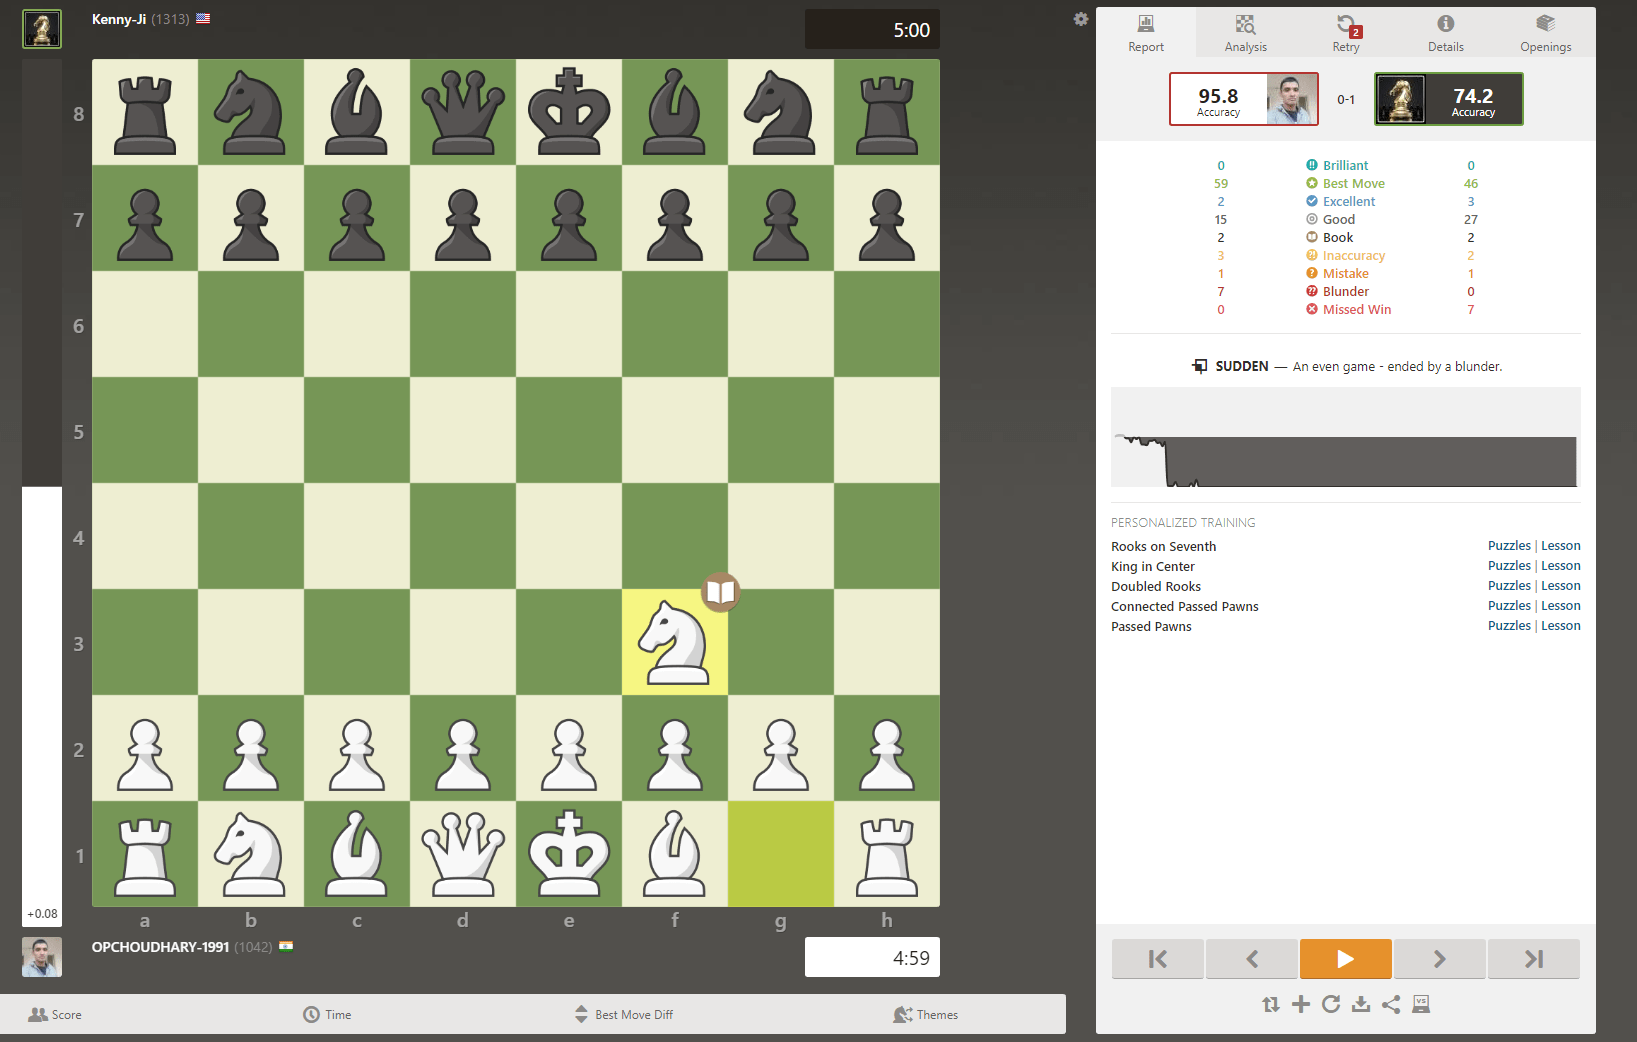 rating - What do you call average? - Chess Stack Exchange